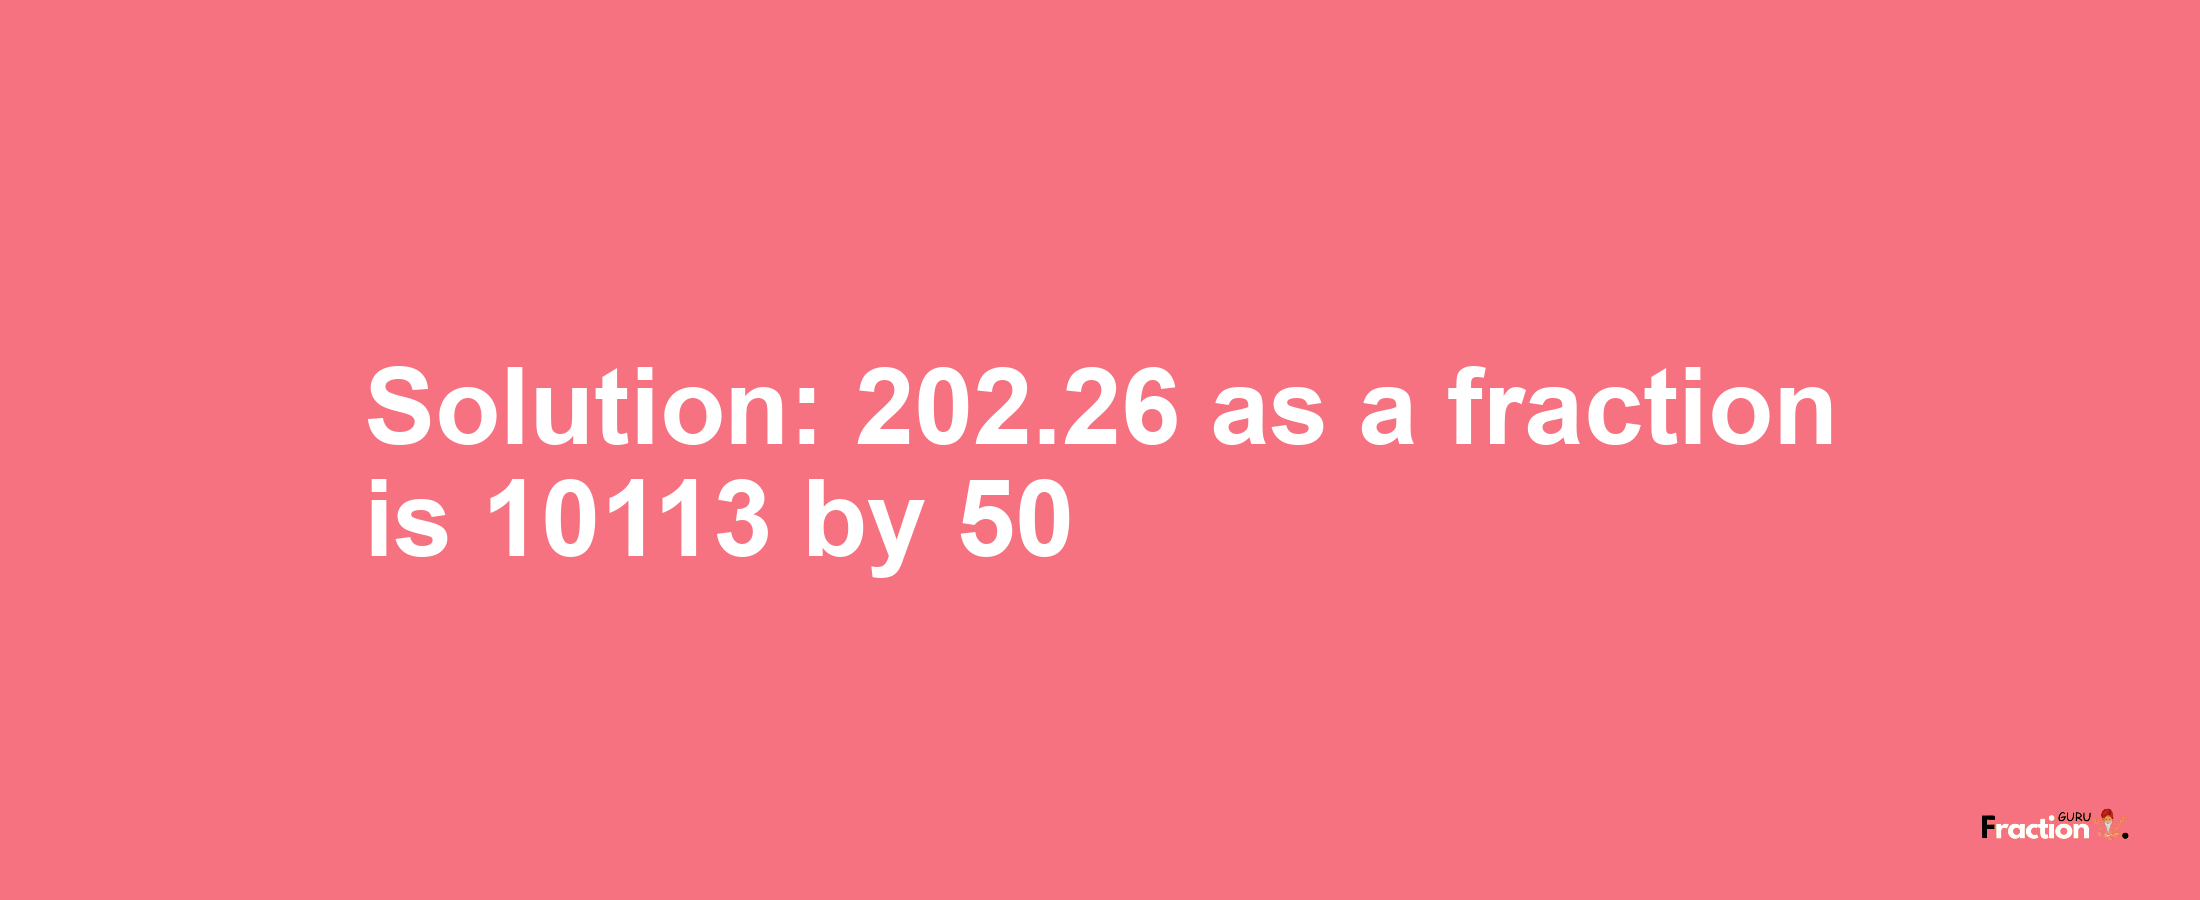 Solution:202.26 as a fraction is 10113/50